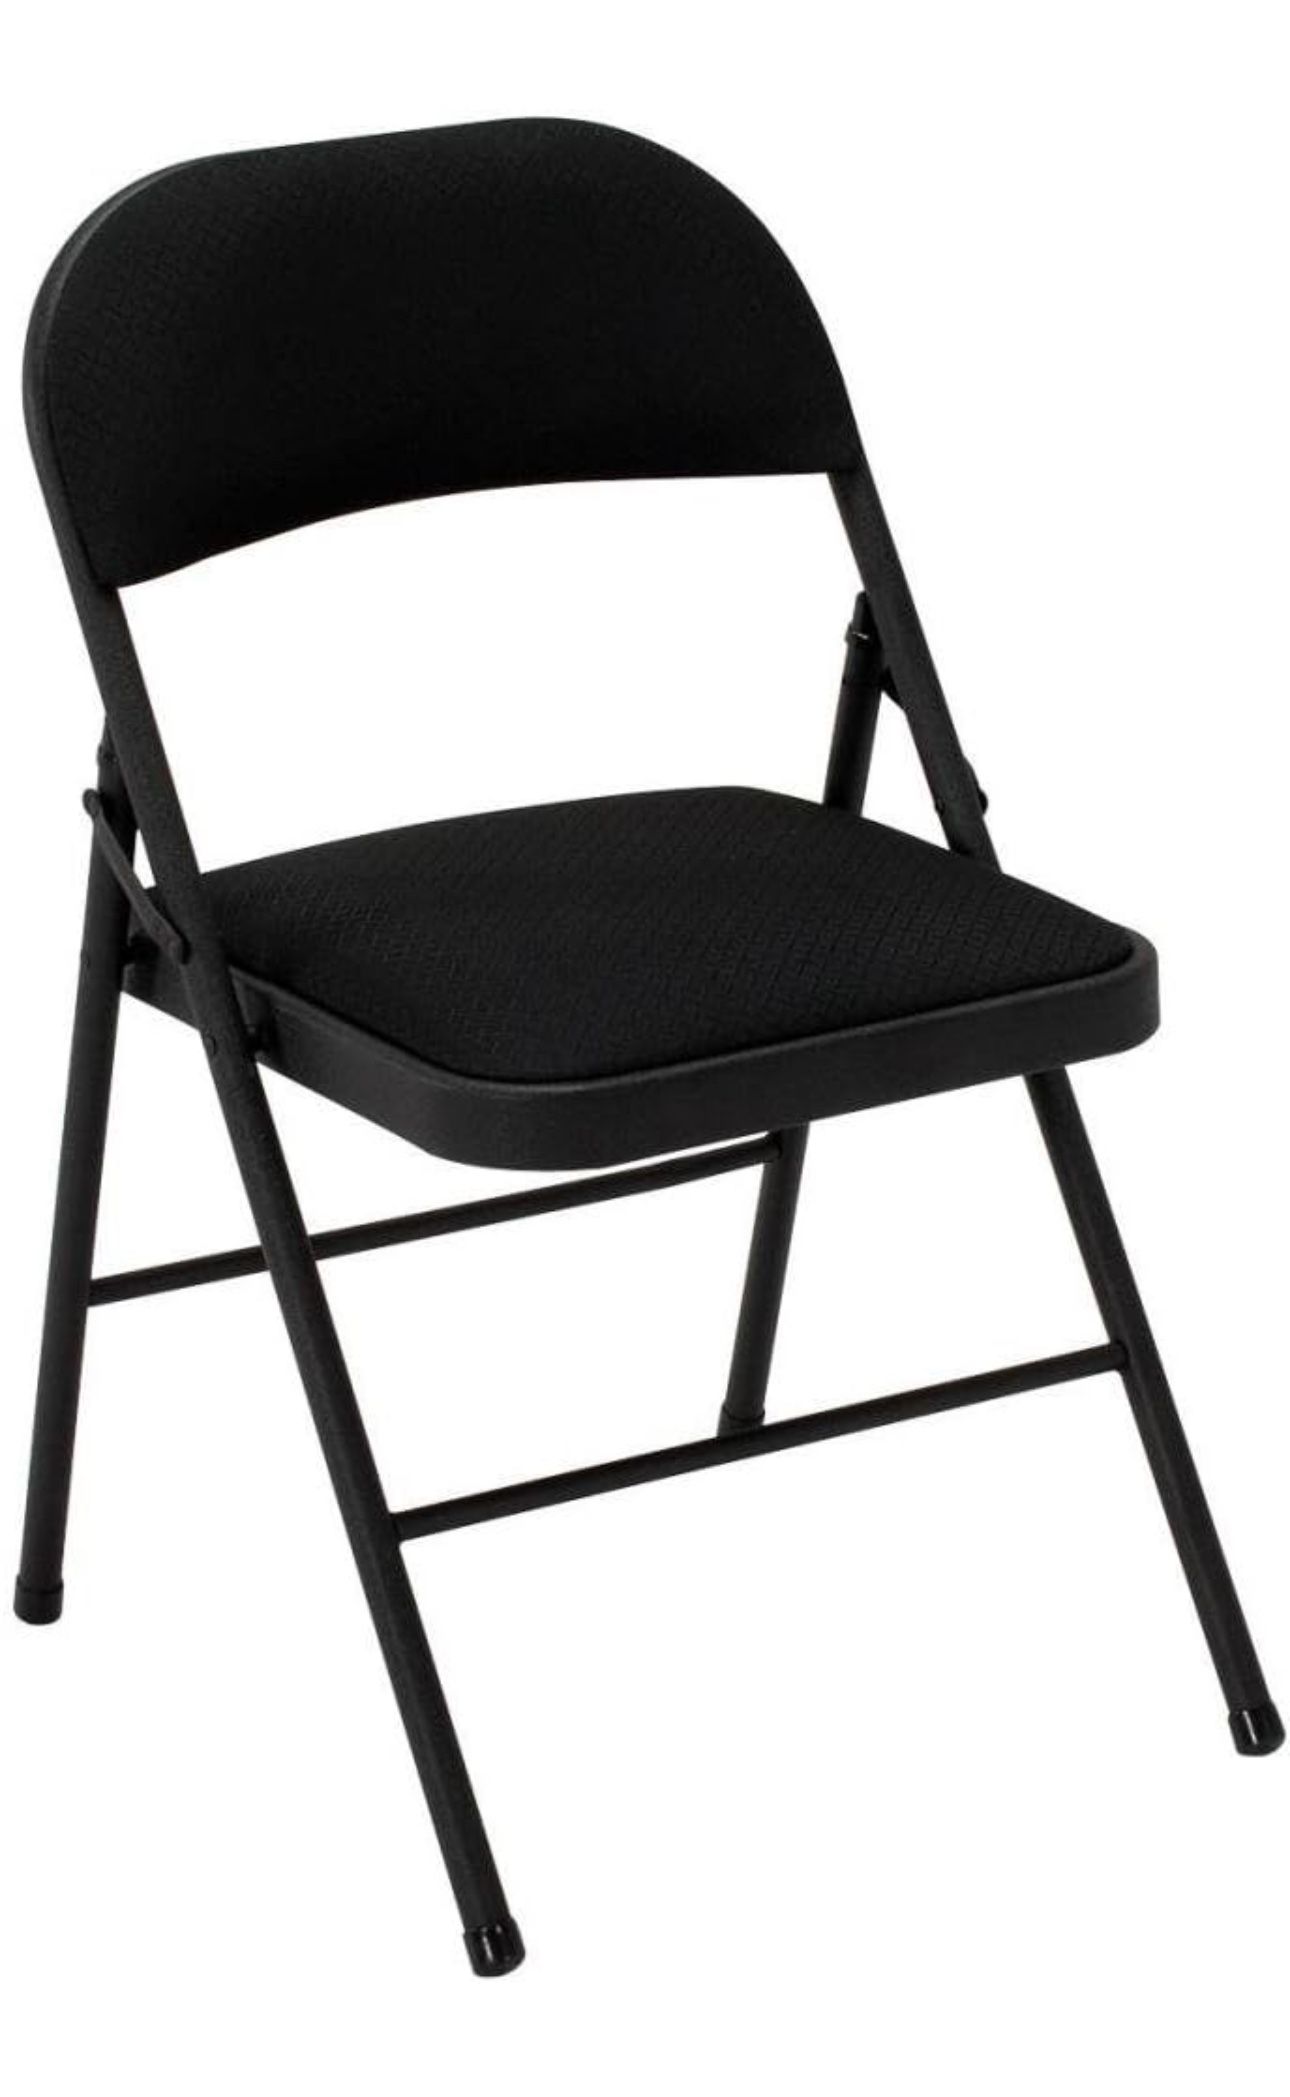 Folding Chairs With Cushion